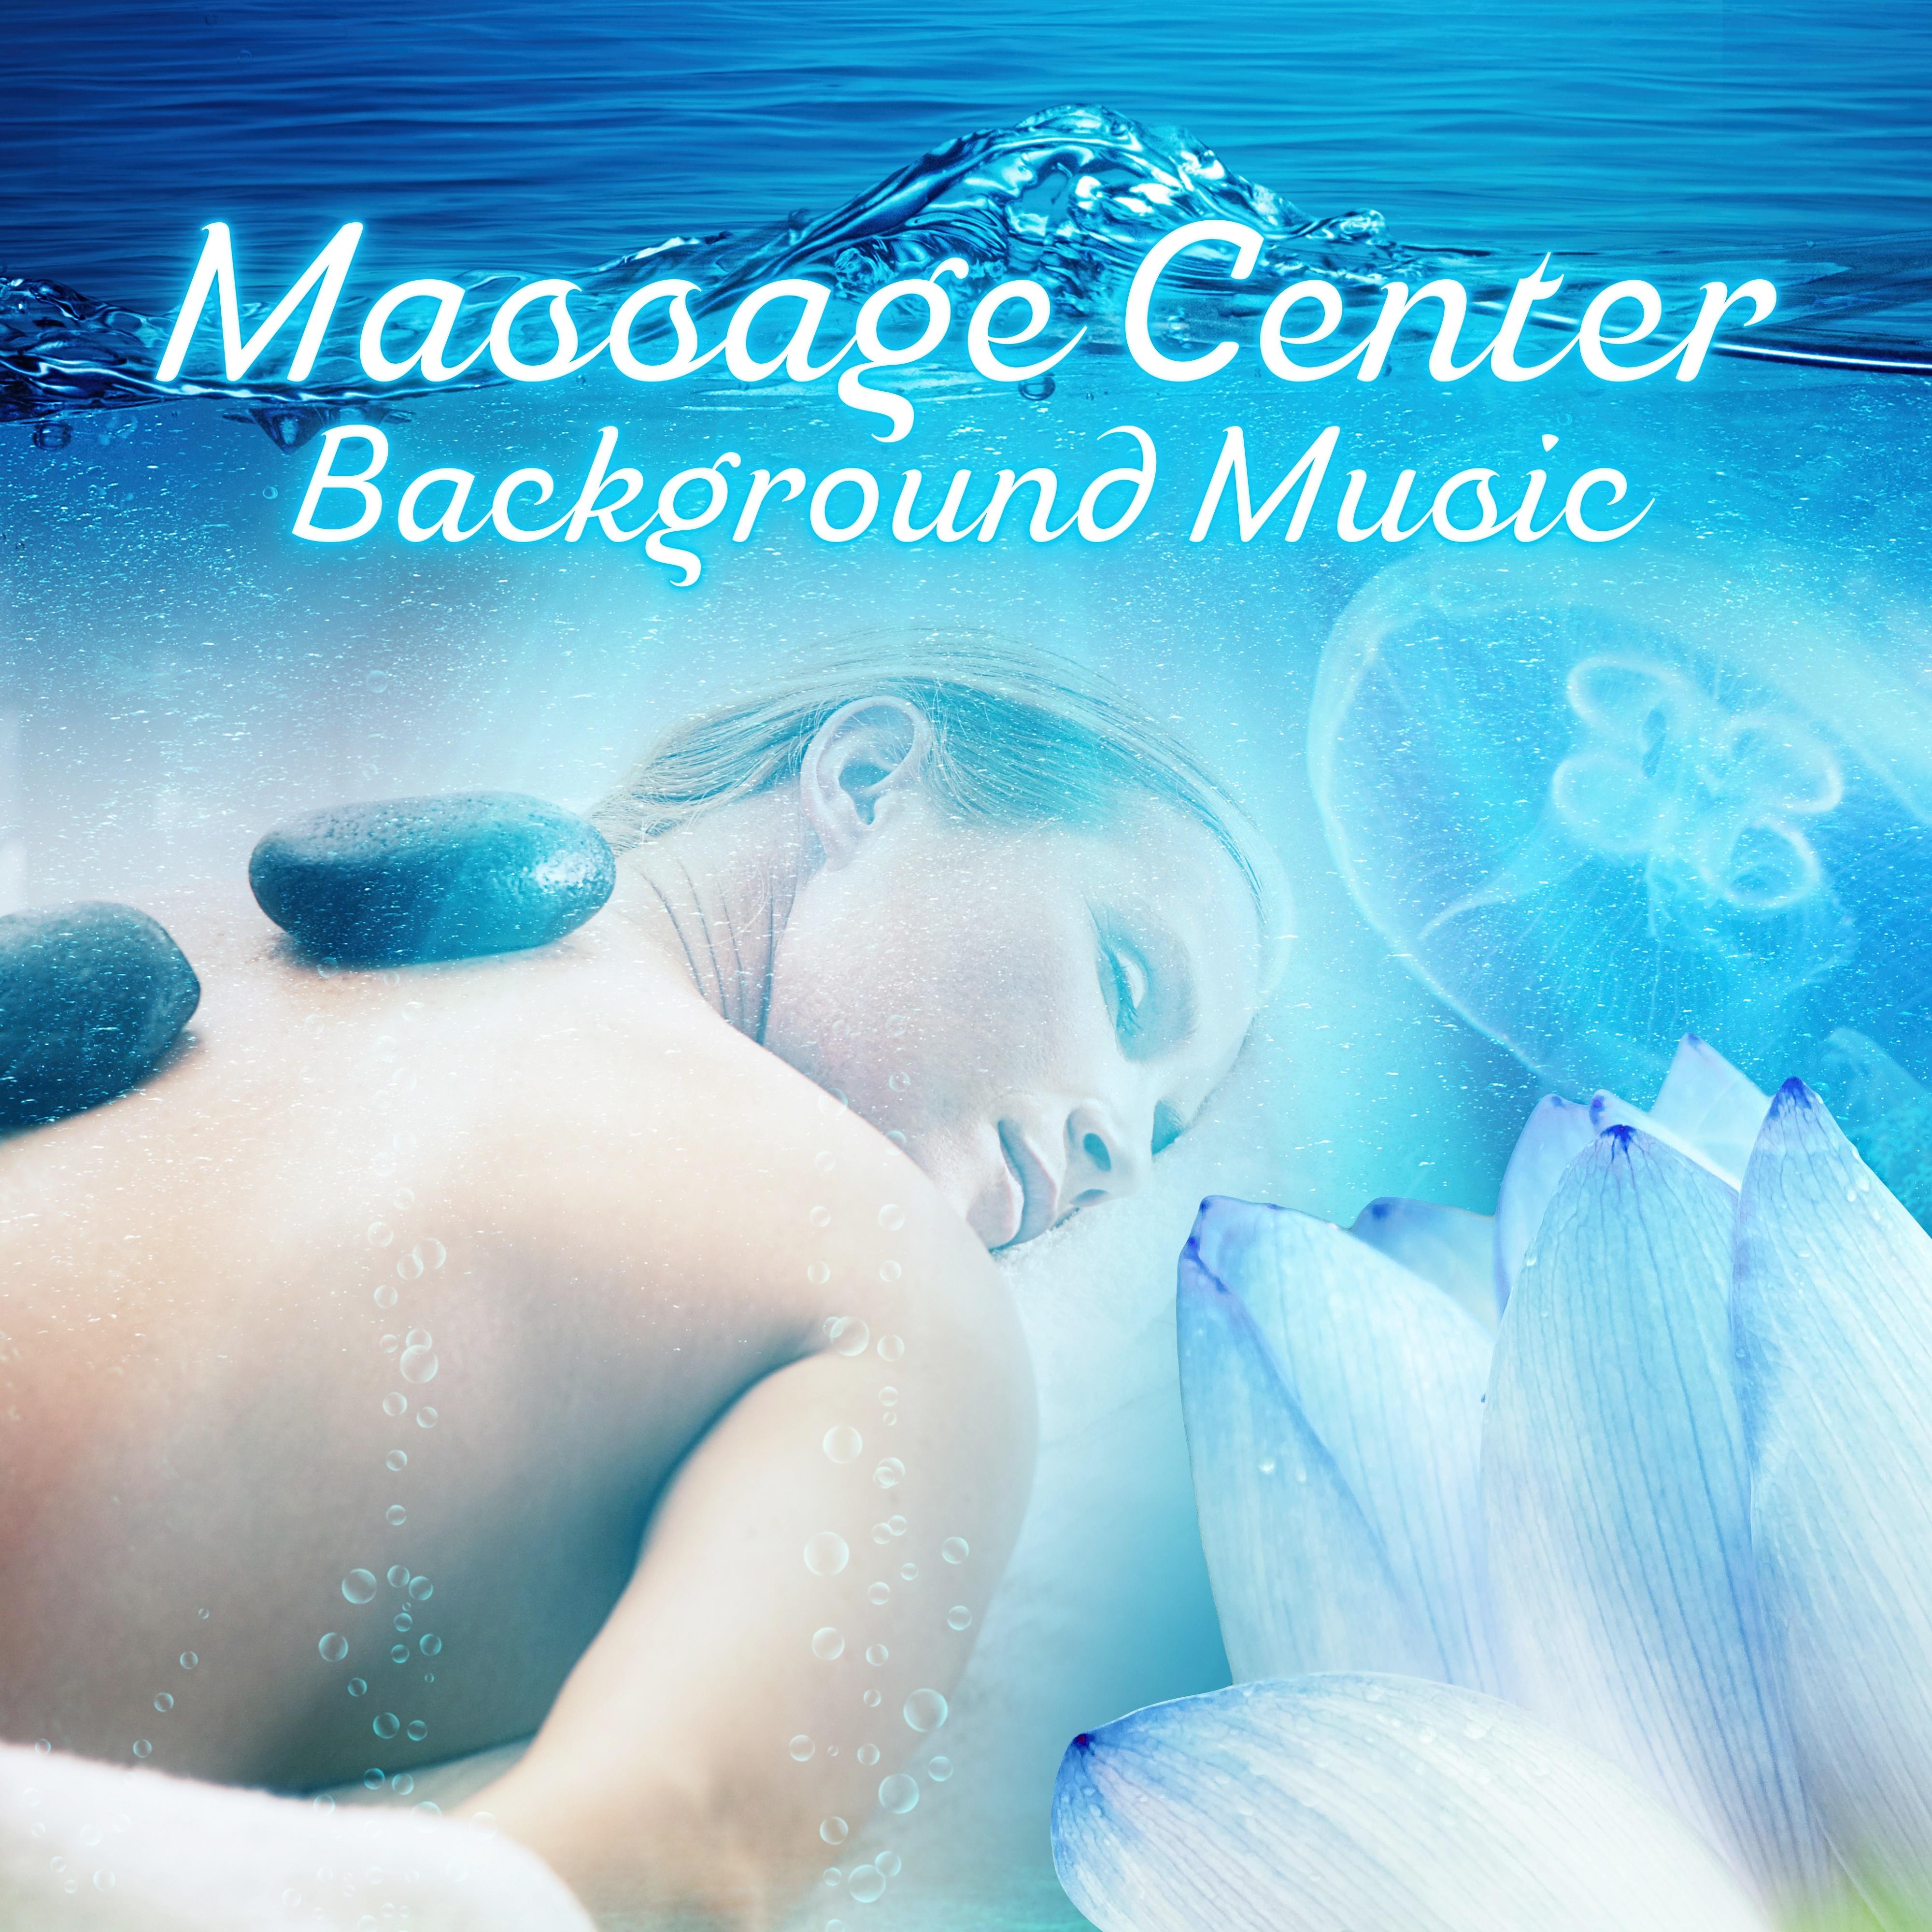 Massage Center Background Music  Relaxing Music with Nature Sounds for Beauty Center, Nail Salon, Manicure  Pedicure, Wellness Spa, Home Spa Relaxation, Relax in Skin Clinic, Health  Beauty, Tranquility Spa